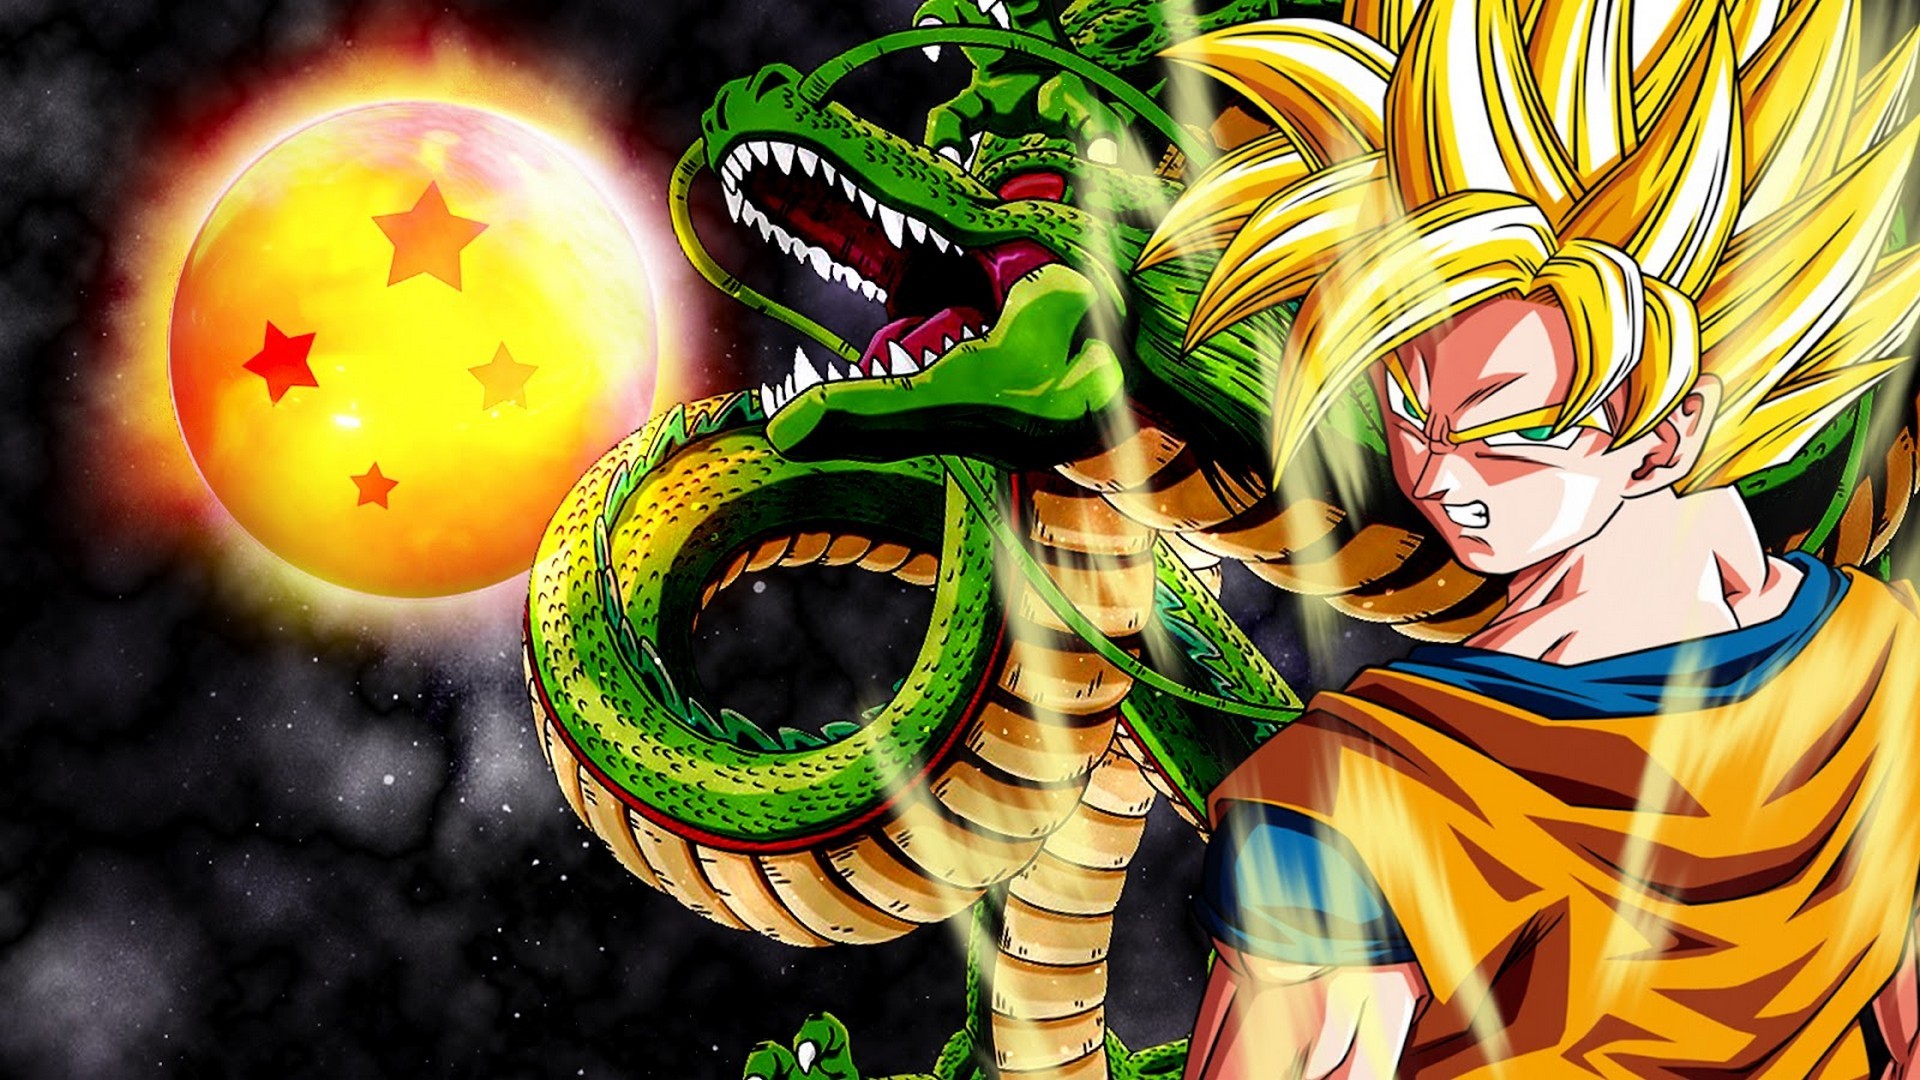 Desktop Wallpaper Goku Super Saiyan with image resolution 1920x1080 pixel. You can use this wallpaper as background for your desktop Computer Screensavers, Android or iPhone smartphones